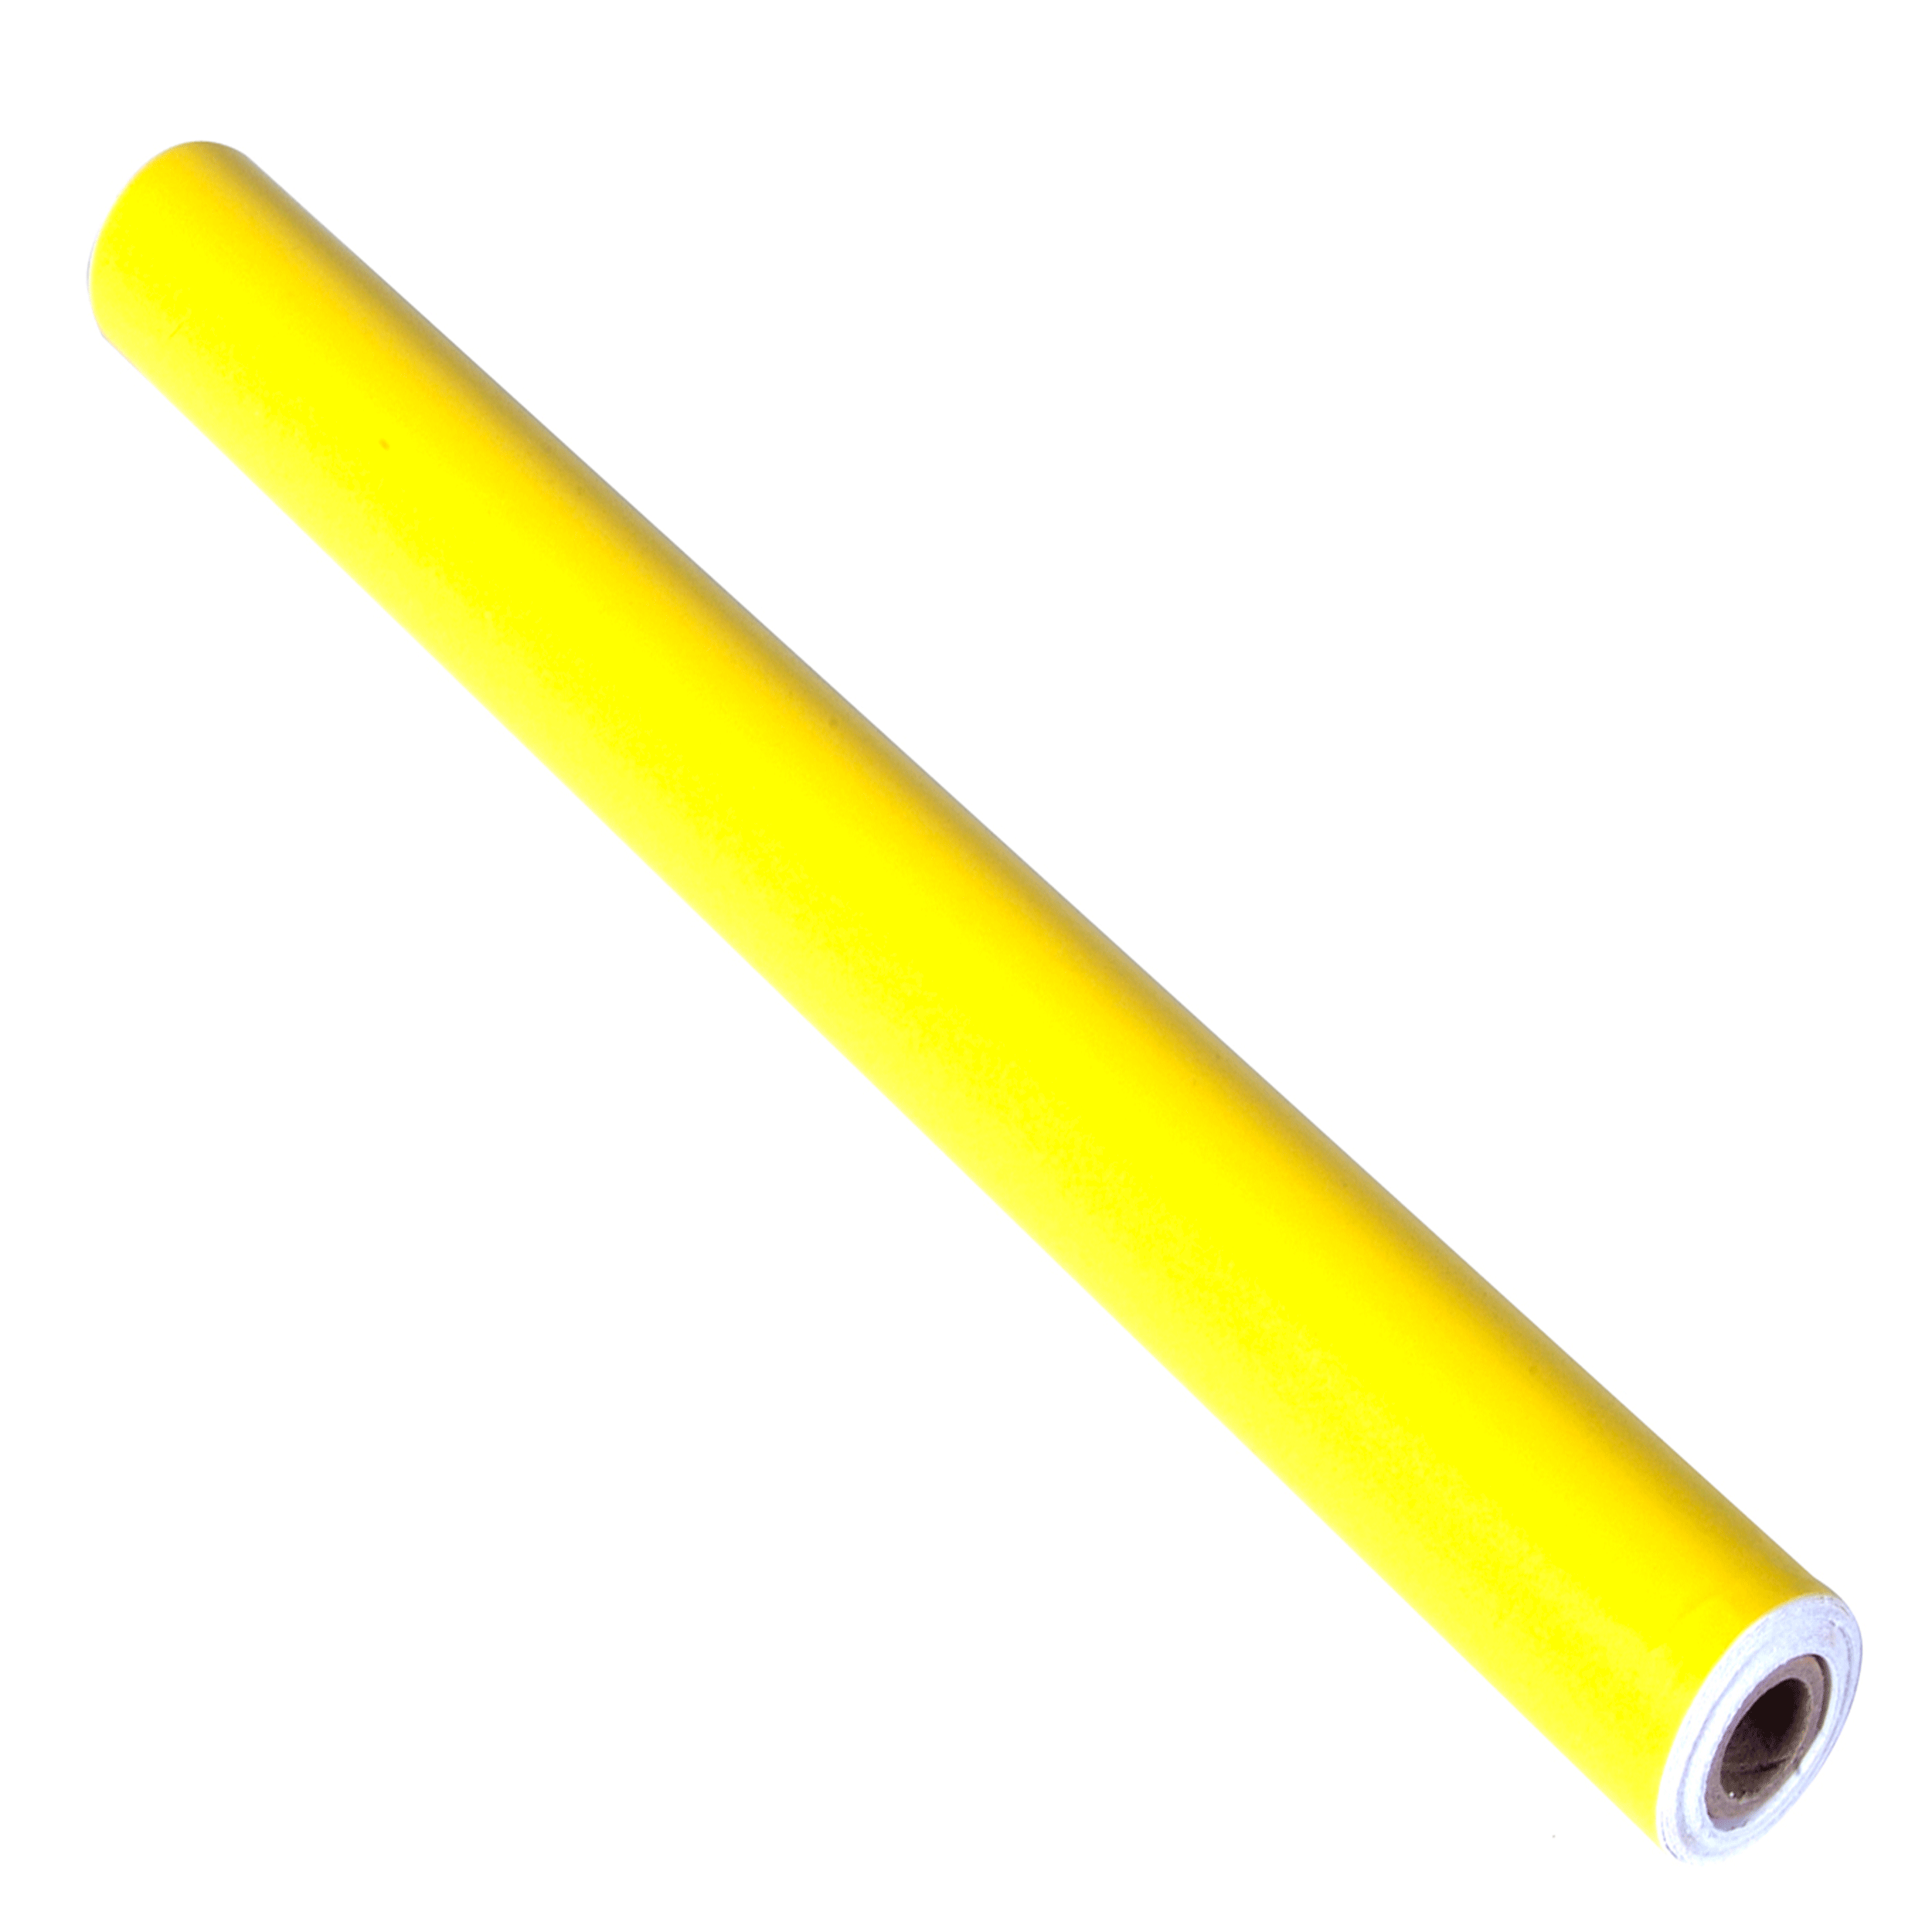 12" X 60" Shadow Board Yellow Vinyl Self-adhesive Tape Roll To Silhouette And Manage Tools And Equipment